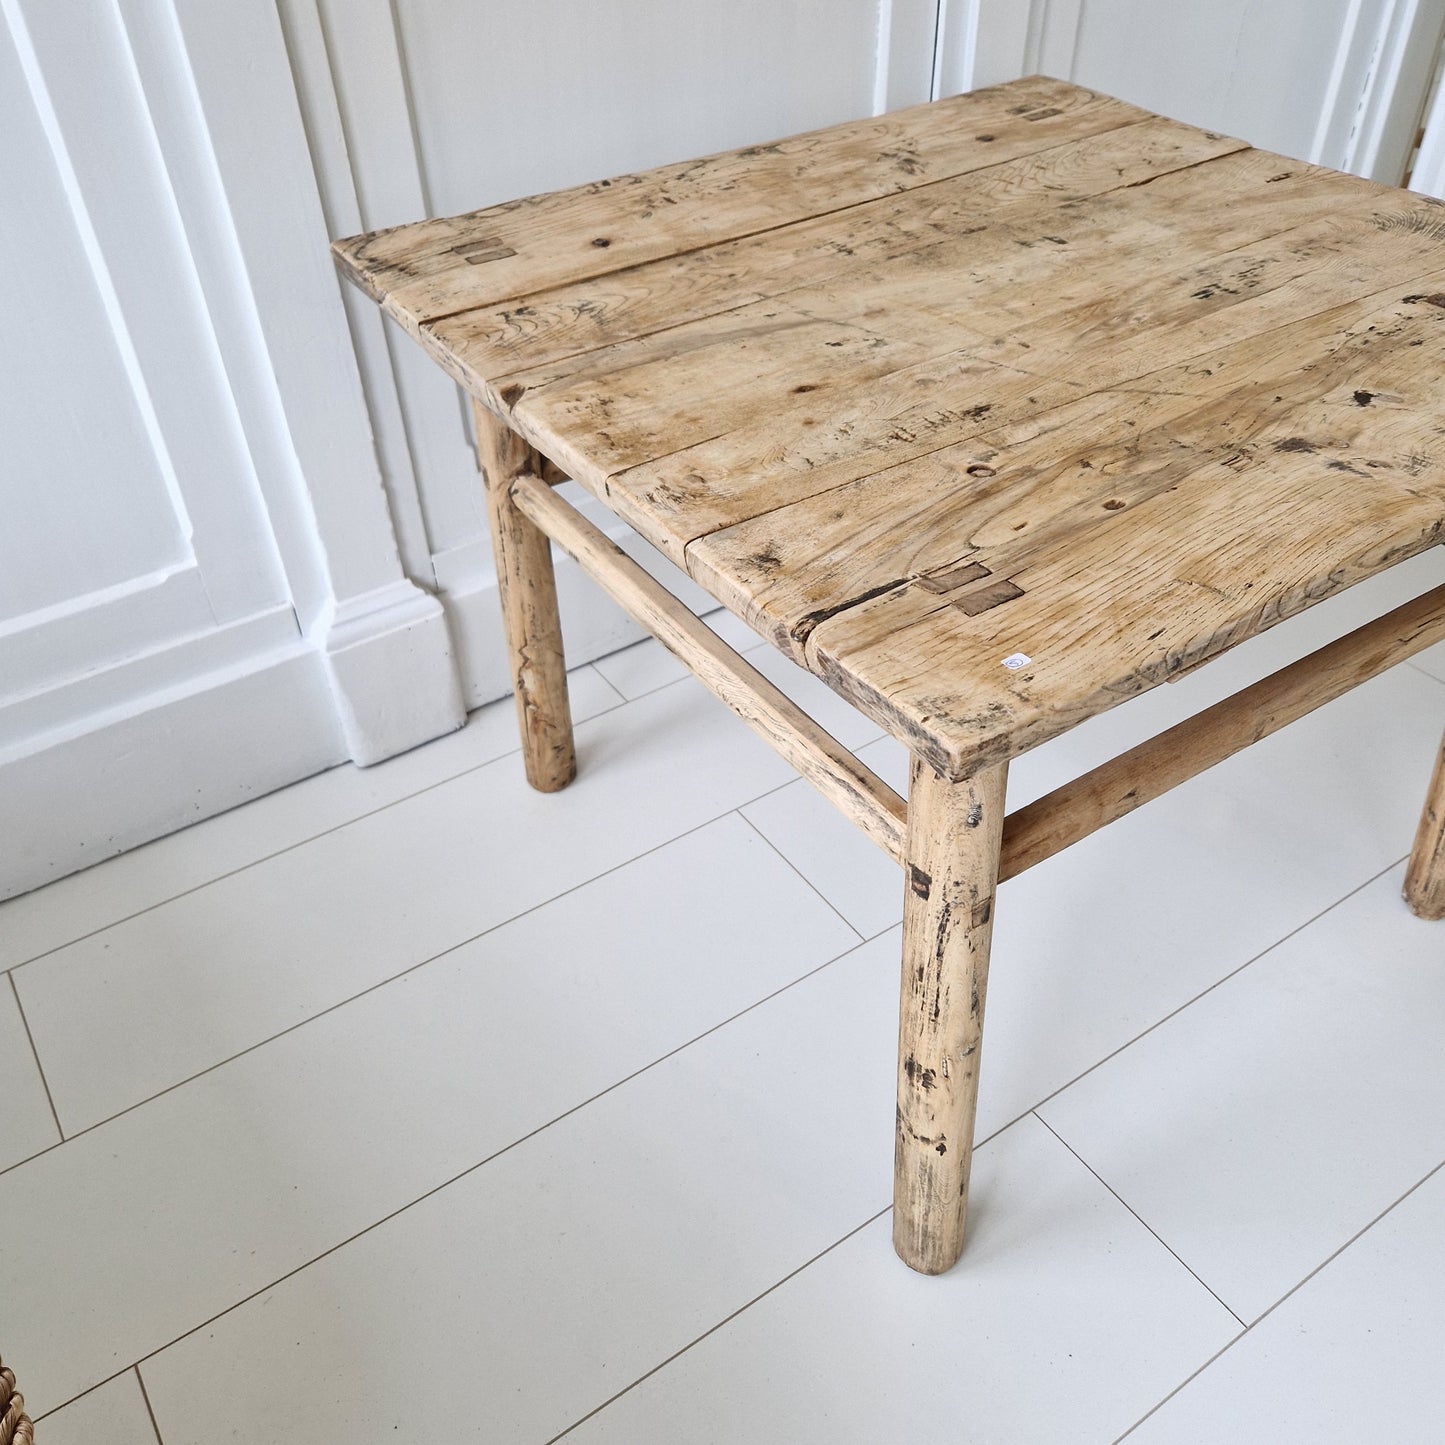 Chinese old wooden table No.5 (67x68x51,5cm)